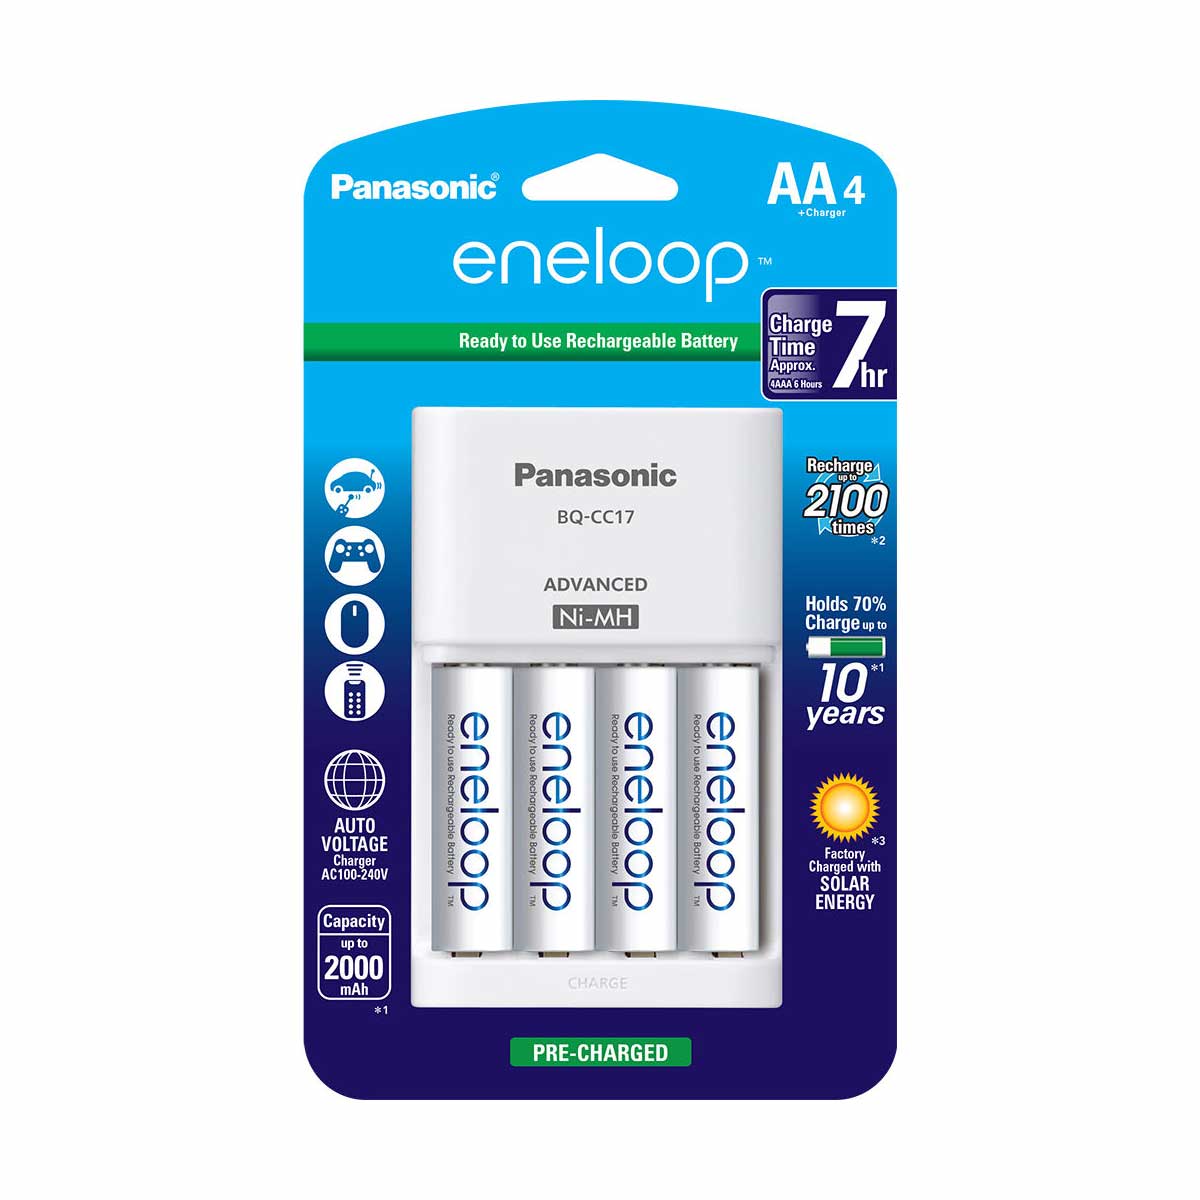 Panasonic Eneloop AA Ni-MH Rechargeable Batteries 4-Pack with Charger